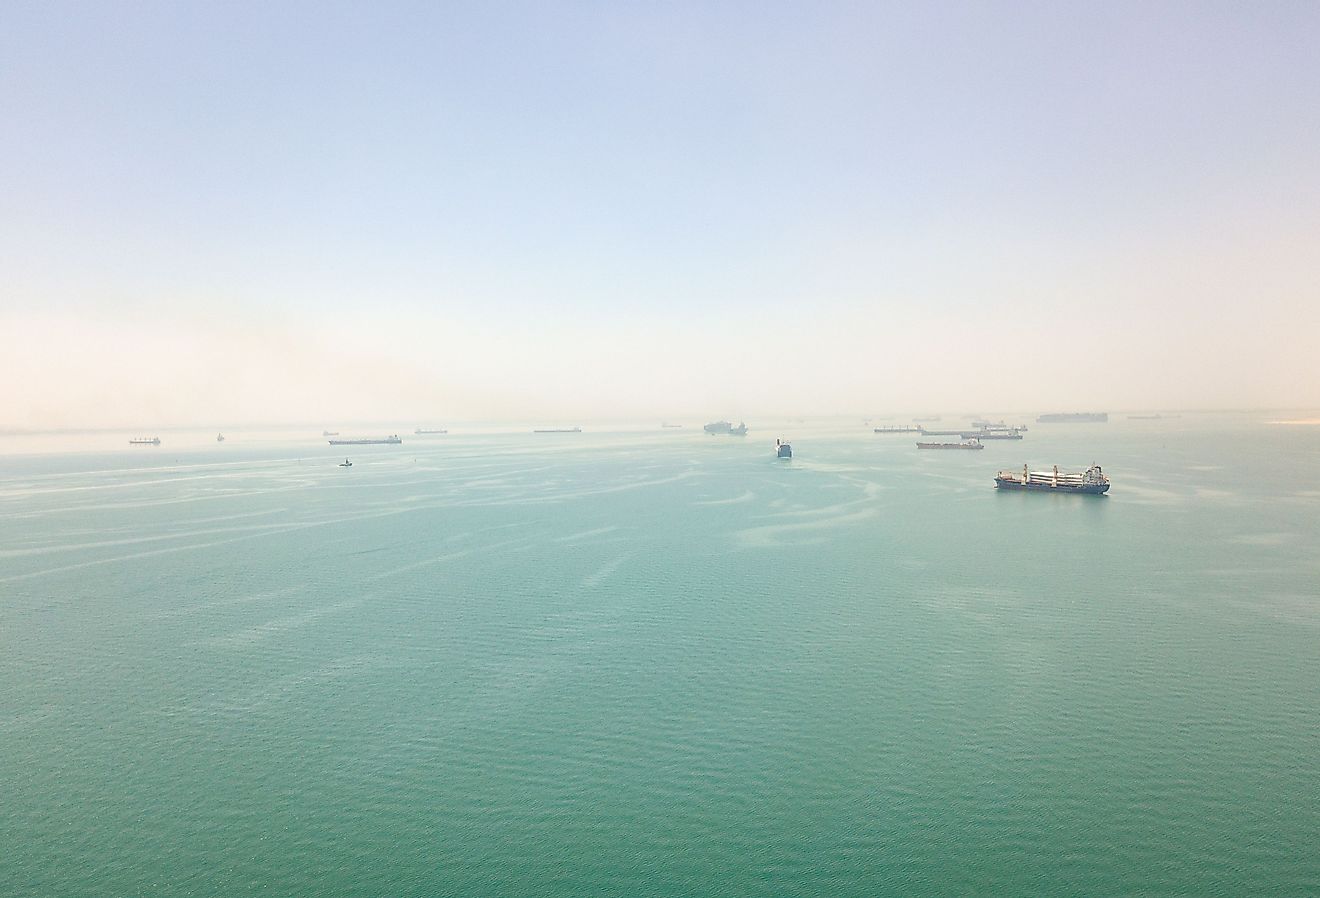 View of ships at anchor in the Great Bitter Lake at the halfway point of the Suez Canal. Image credit FabianIrwin via Shutterstock.